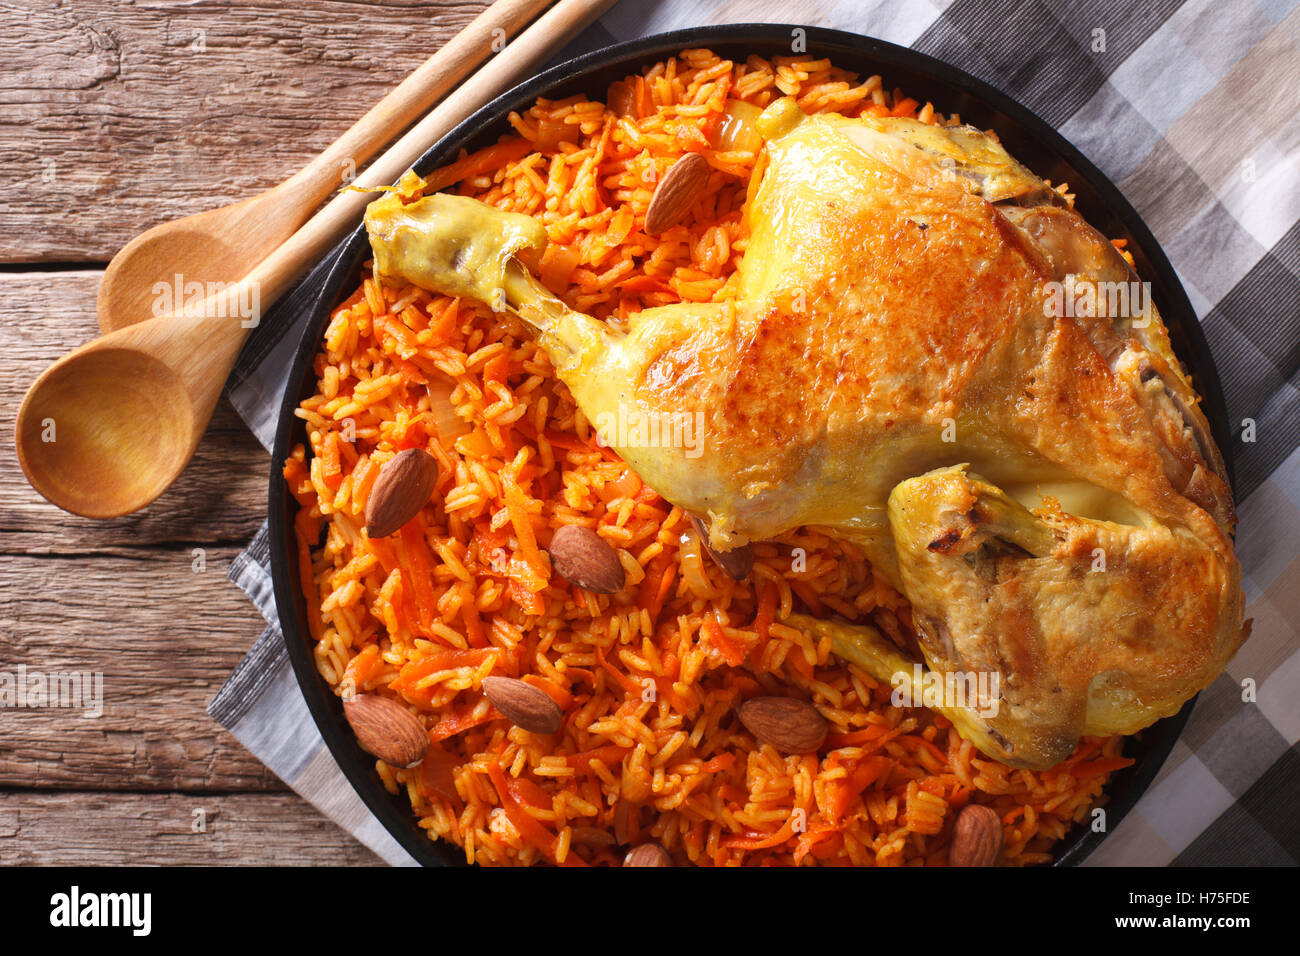 Arabic Food Kabsa: chicken with rice and vegetables close-up on a plate. horizontal view from above Stock Photo